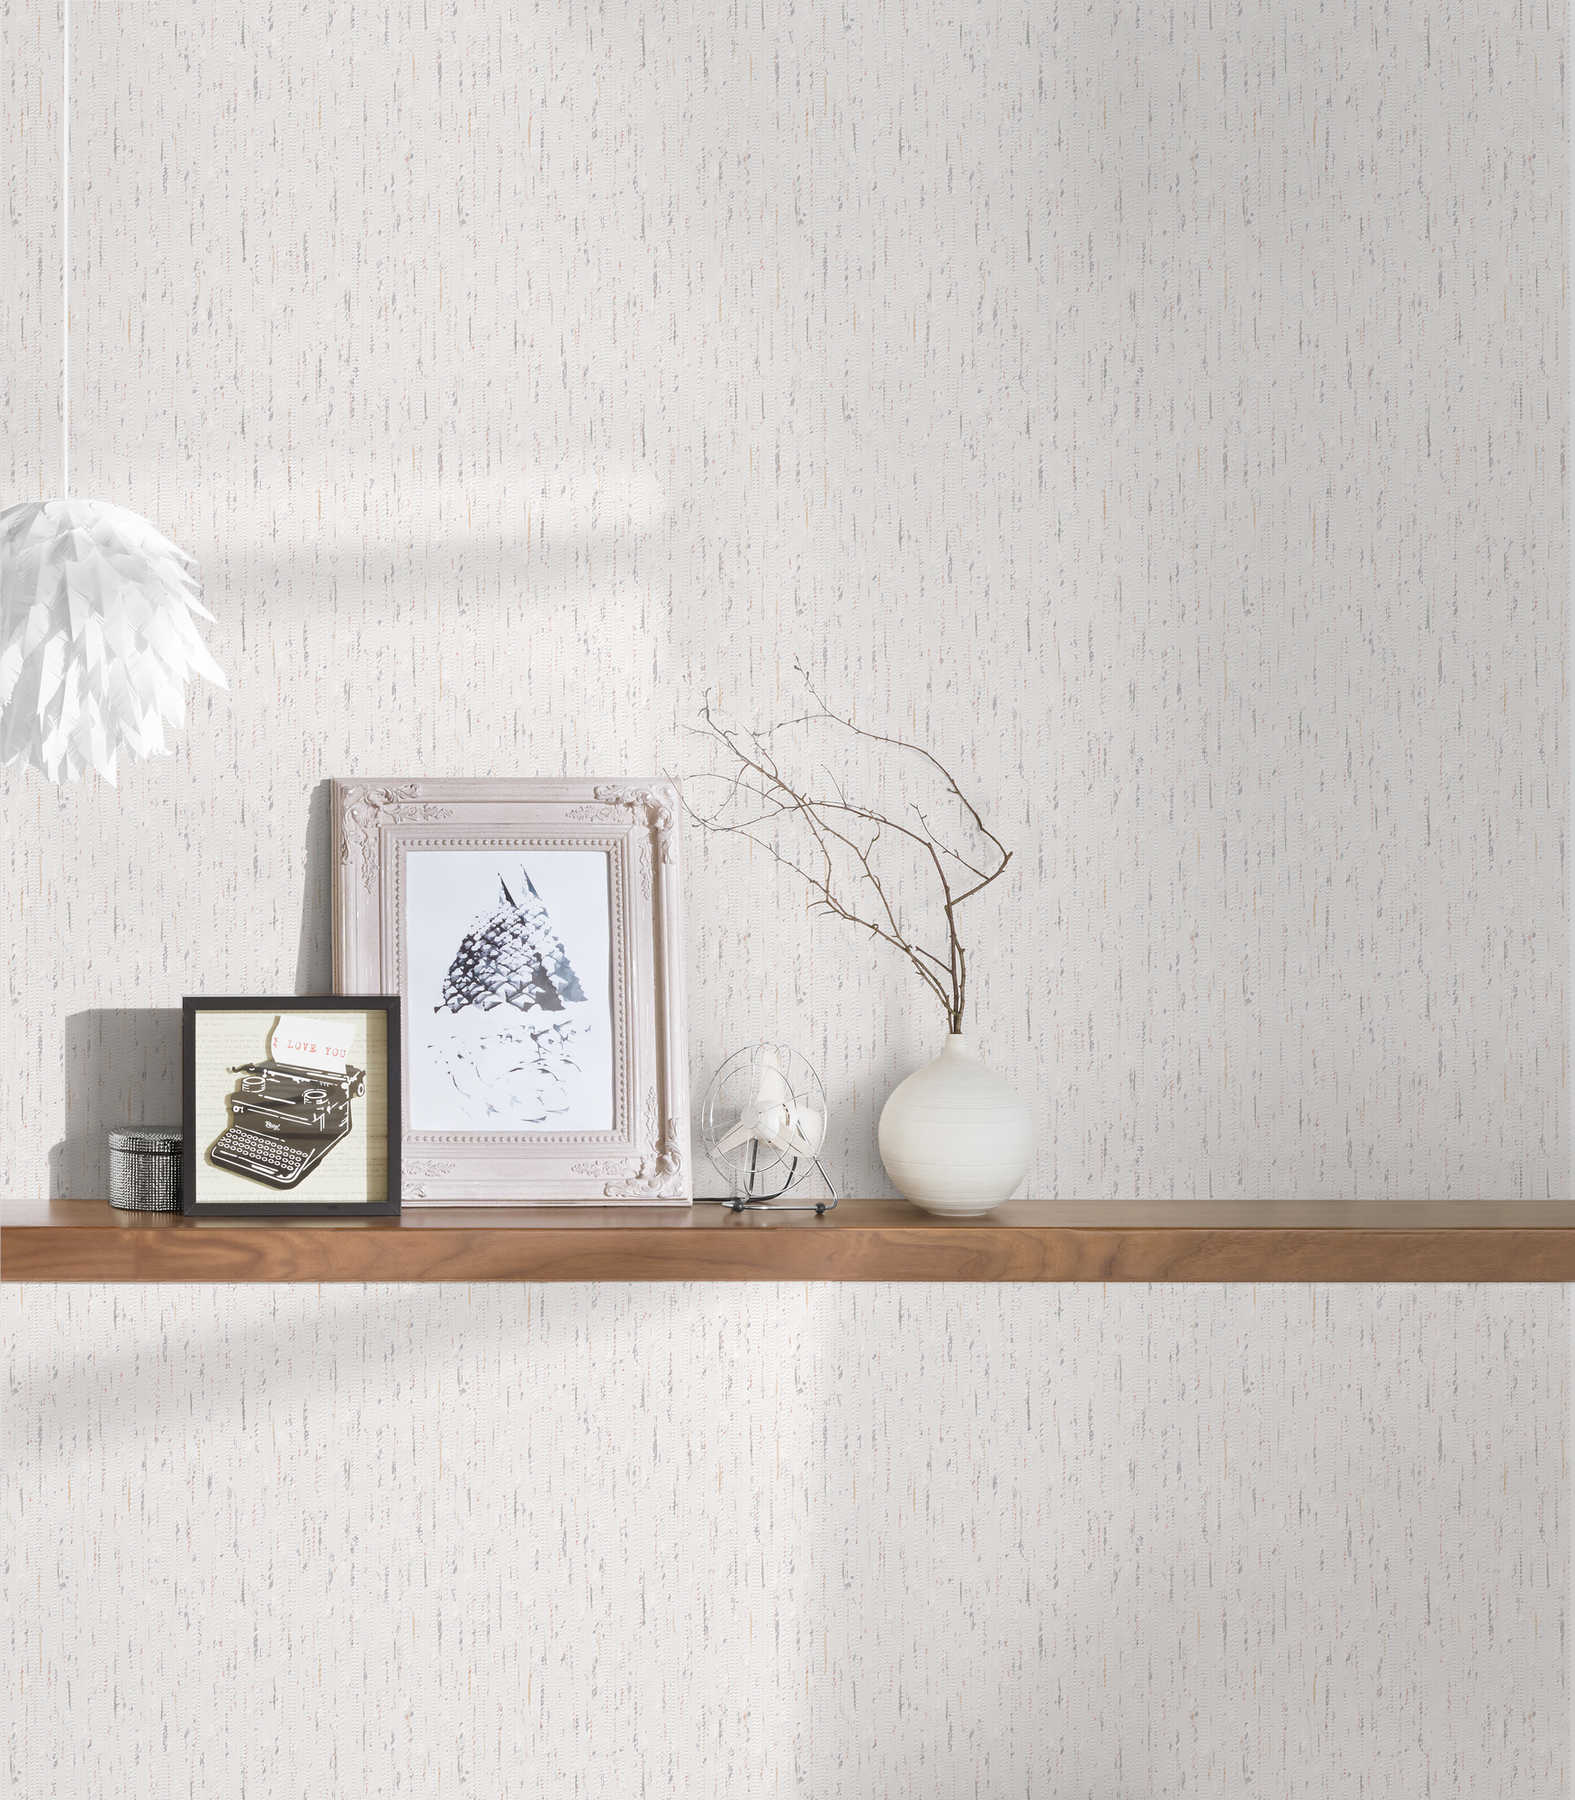             Retro wallpaper with textile look & fabric texture - white
        